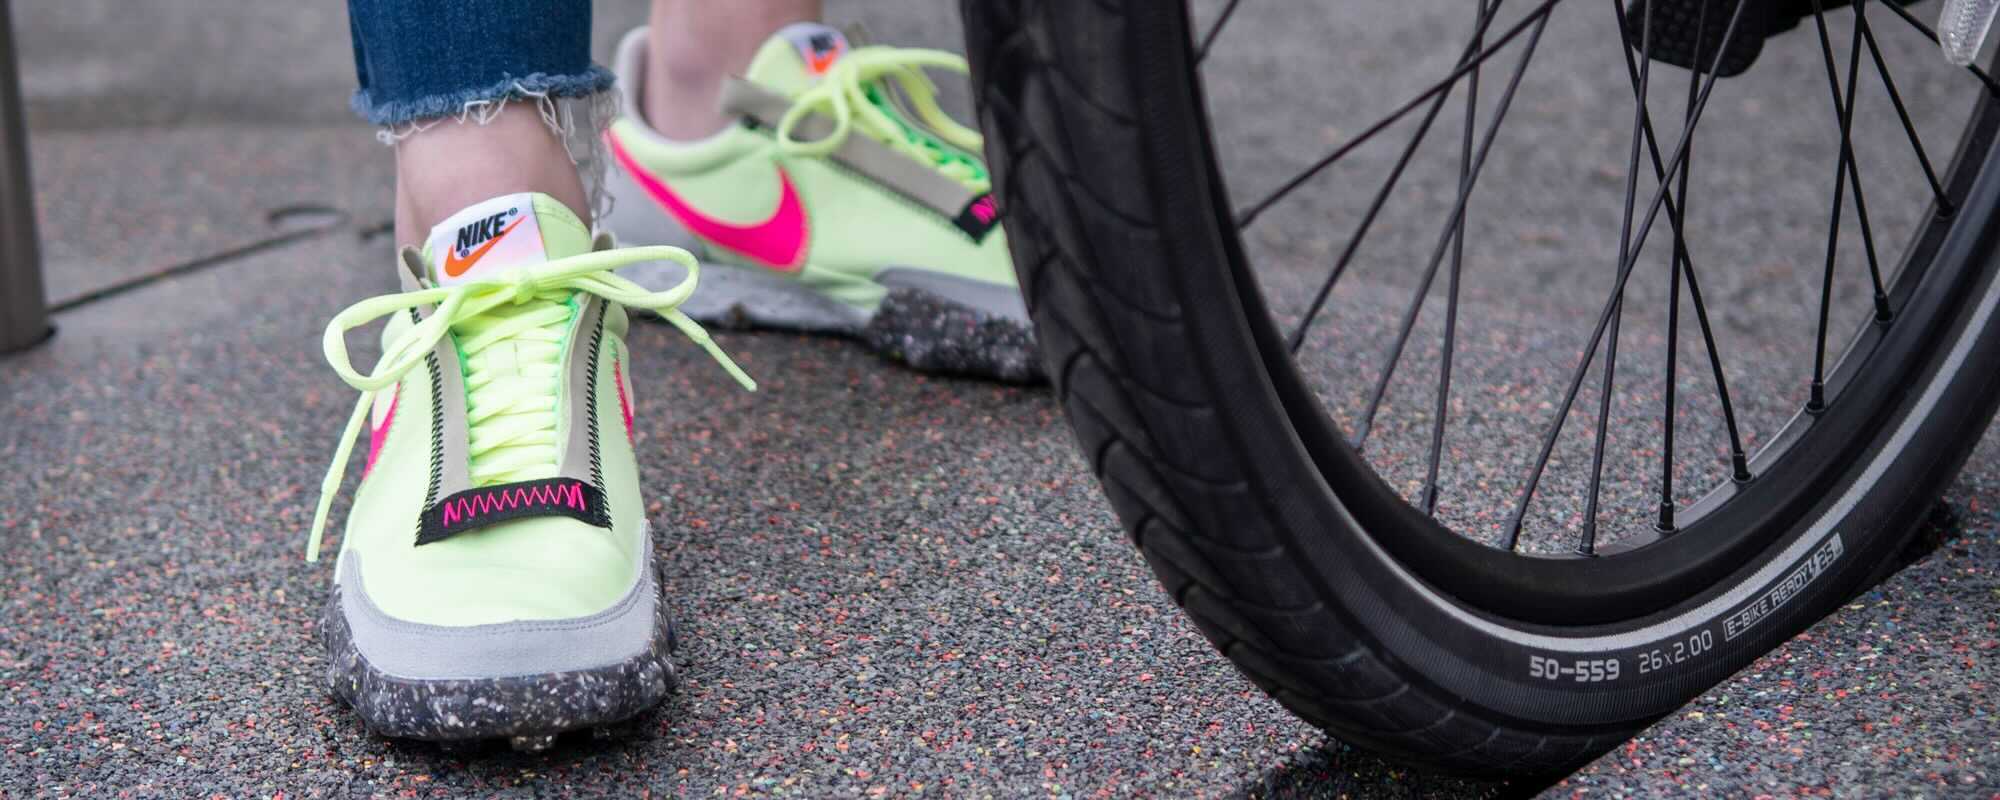 Lyft Uses Nike Grind Recycled in New Bikeshare Stations - Lyft Blog